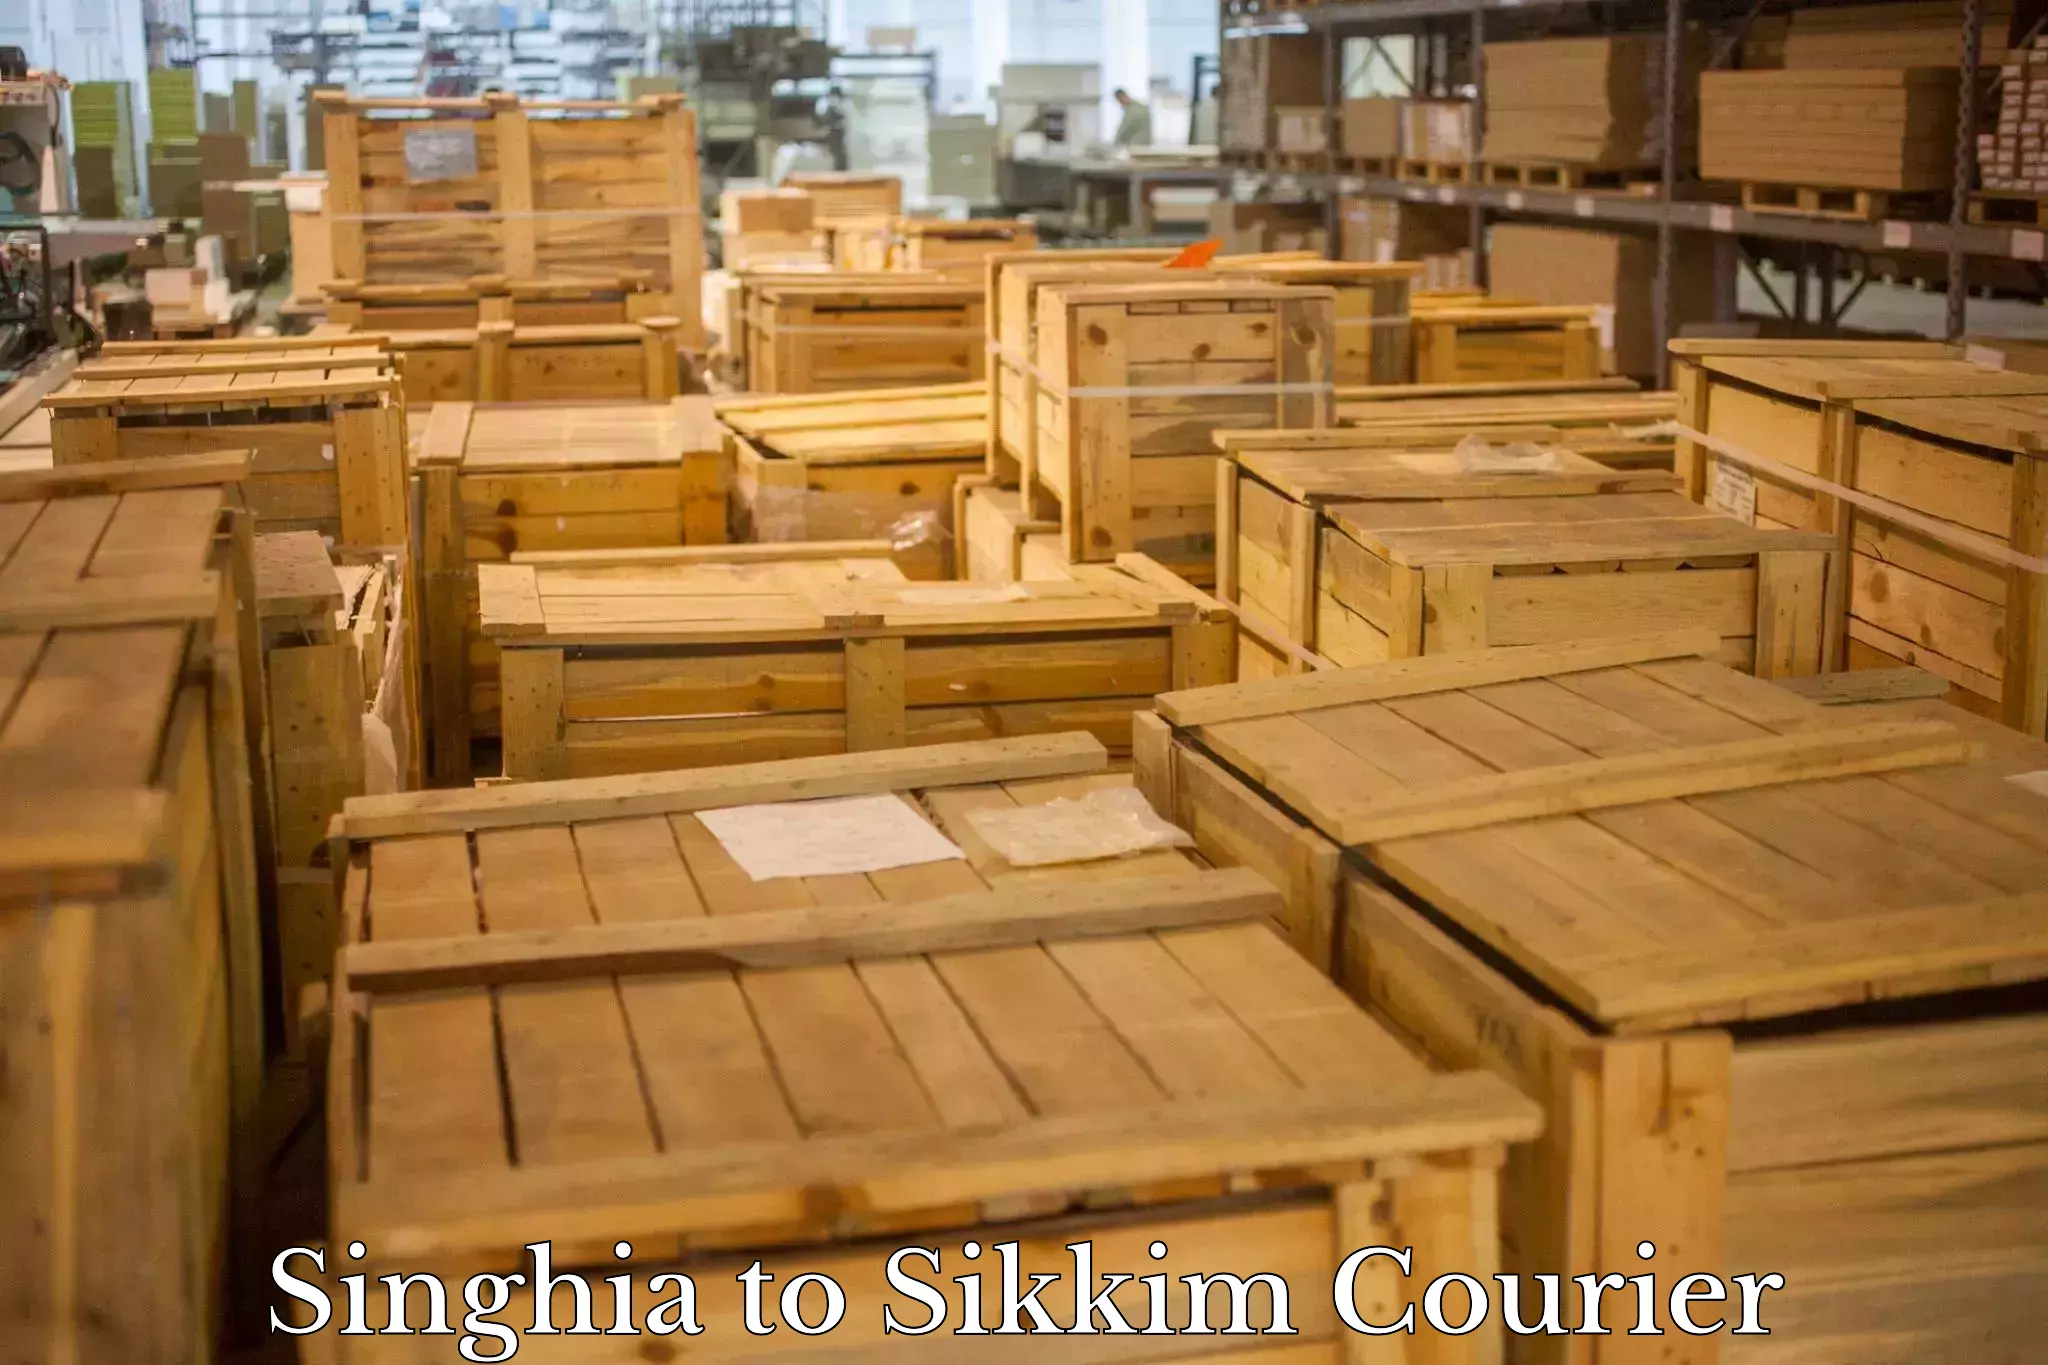 Global courier networks Singhia to West Sikkim